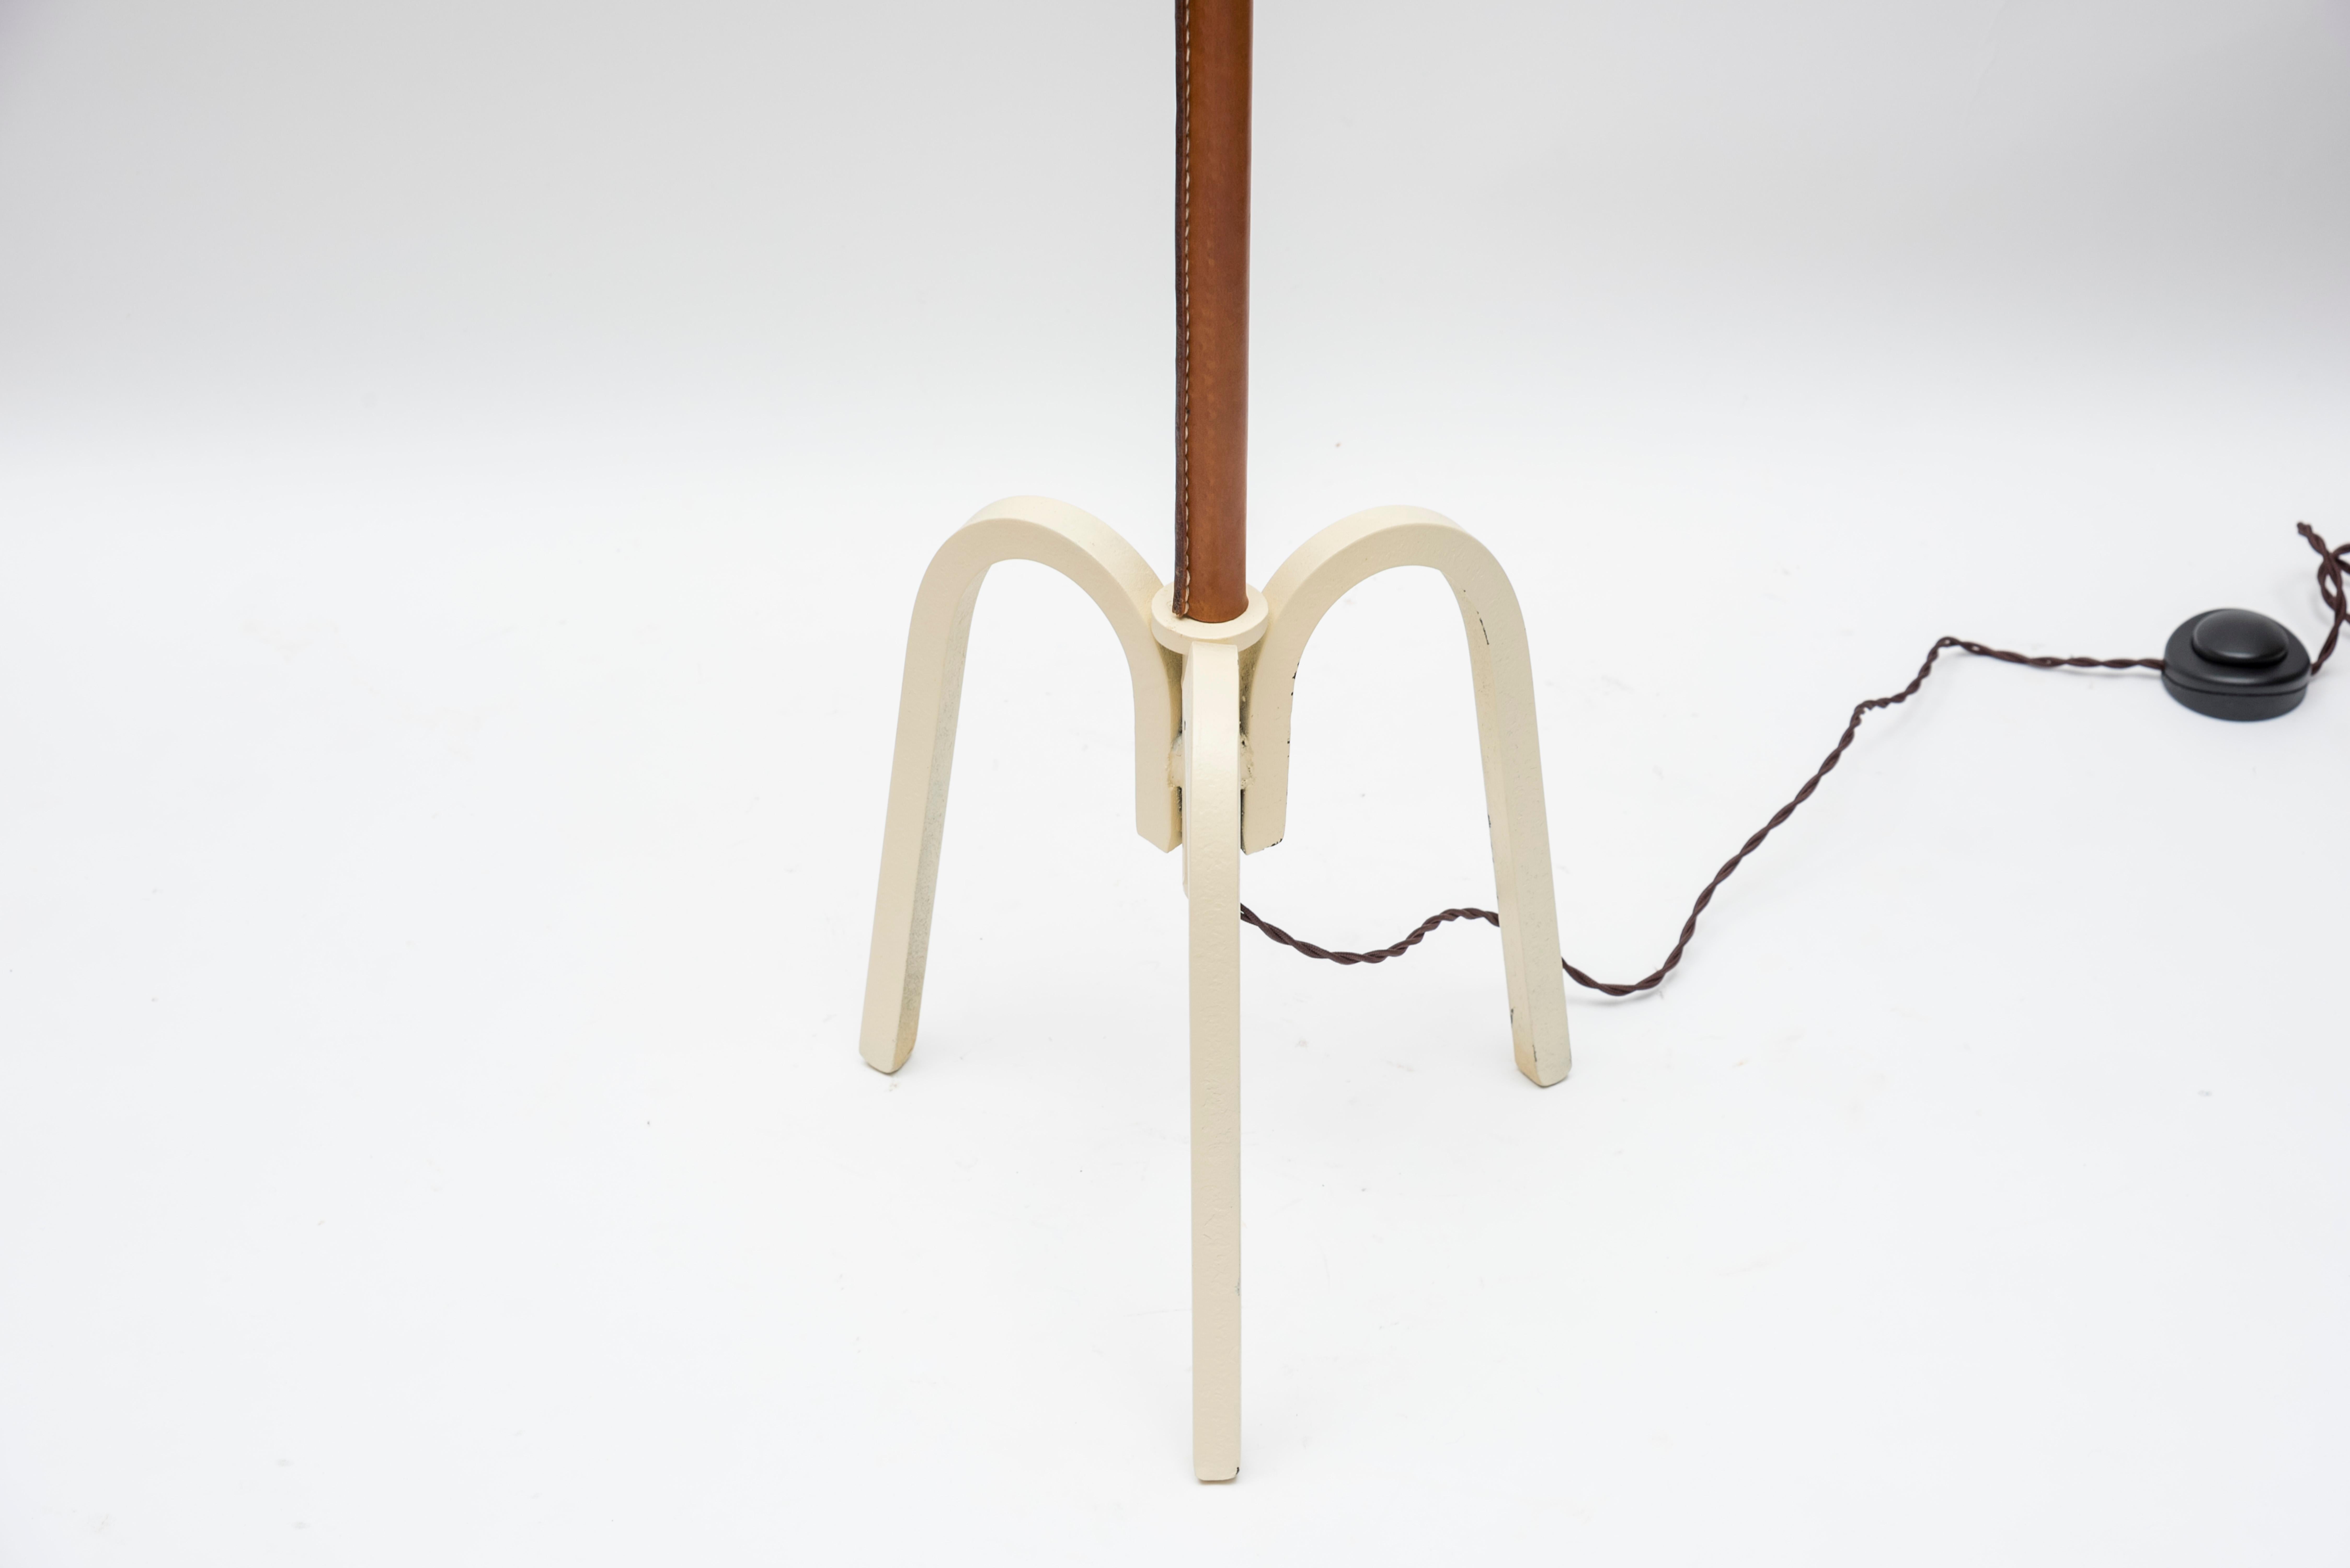 Stitched Leather floor lamp by Jacques Adnet
Dimensions given without shade
No shade provided.